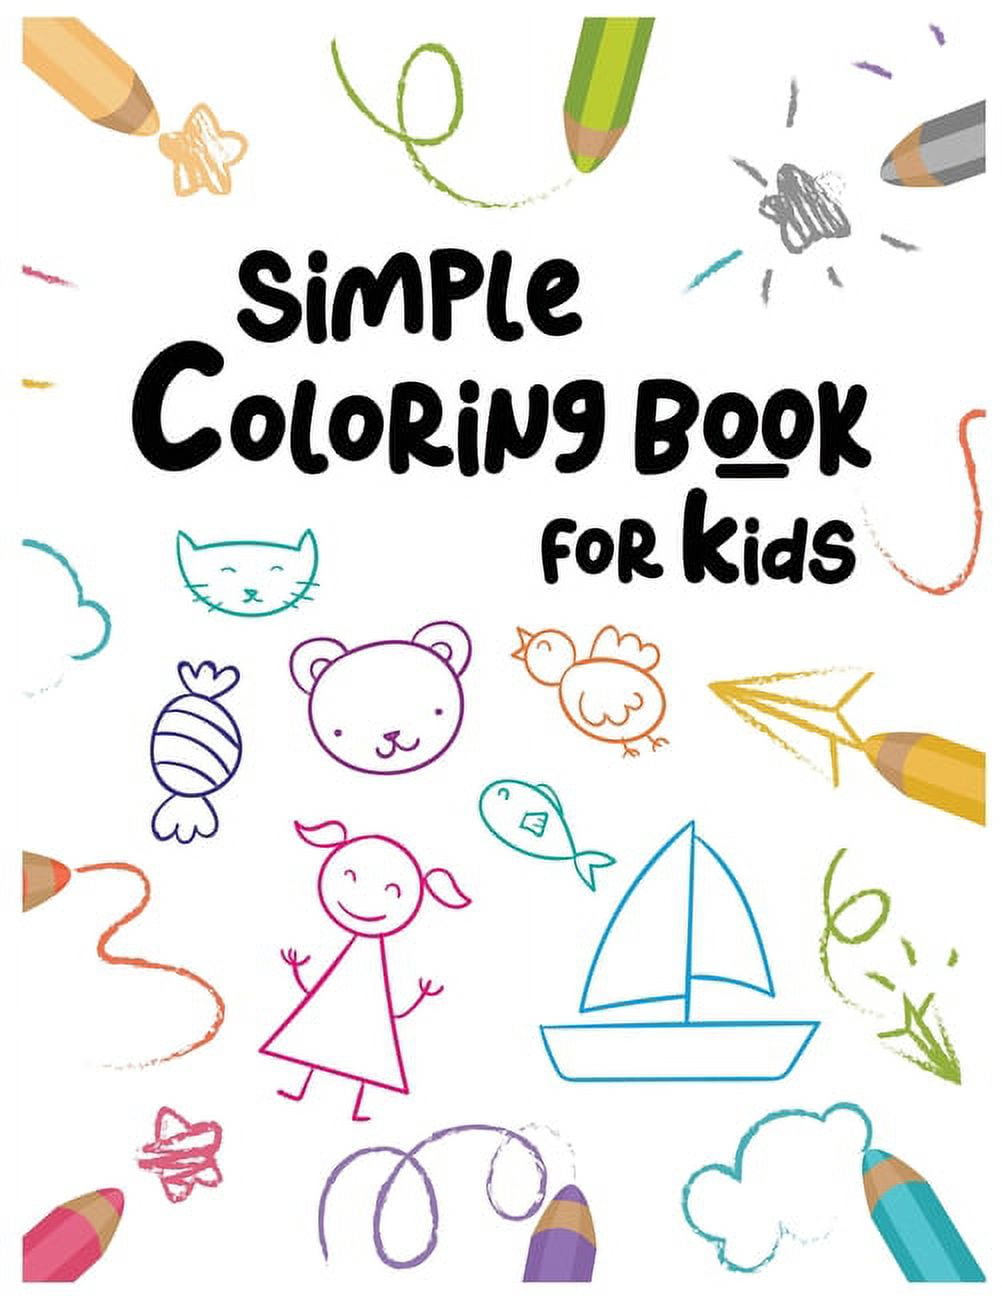 Coloring Books For Kids Ages 4-8: Children Coloring and Activity Books for  Kids Ages 3-5, 6-8, Boys, Girls, Early Learning (Paperback)